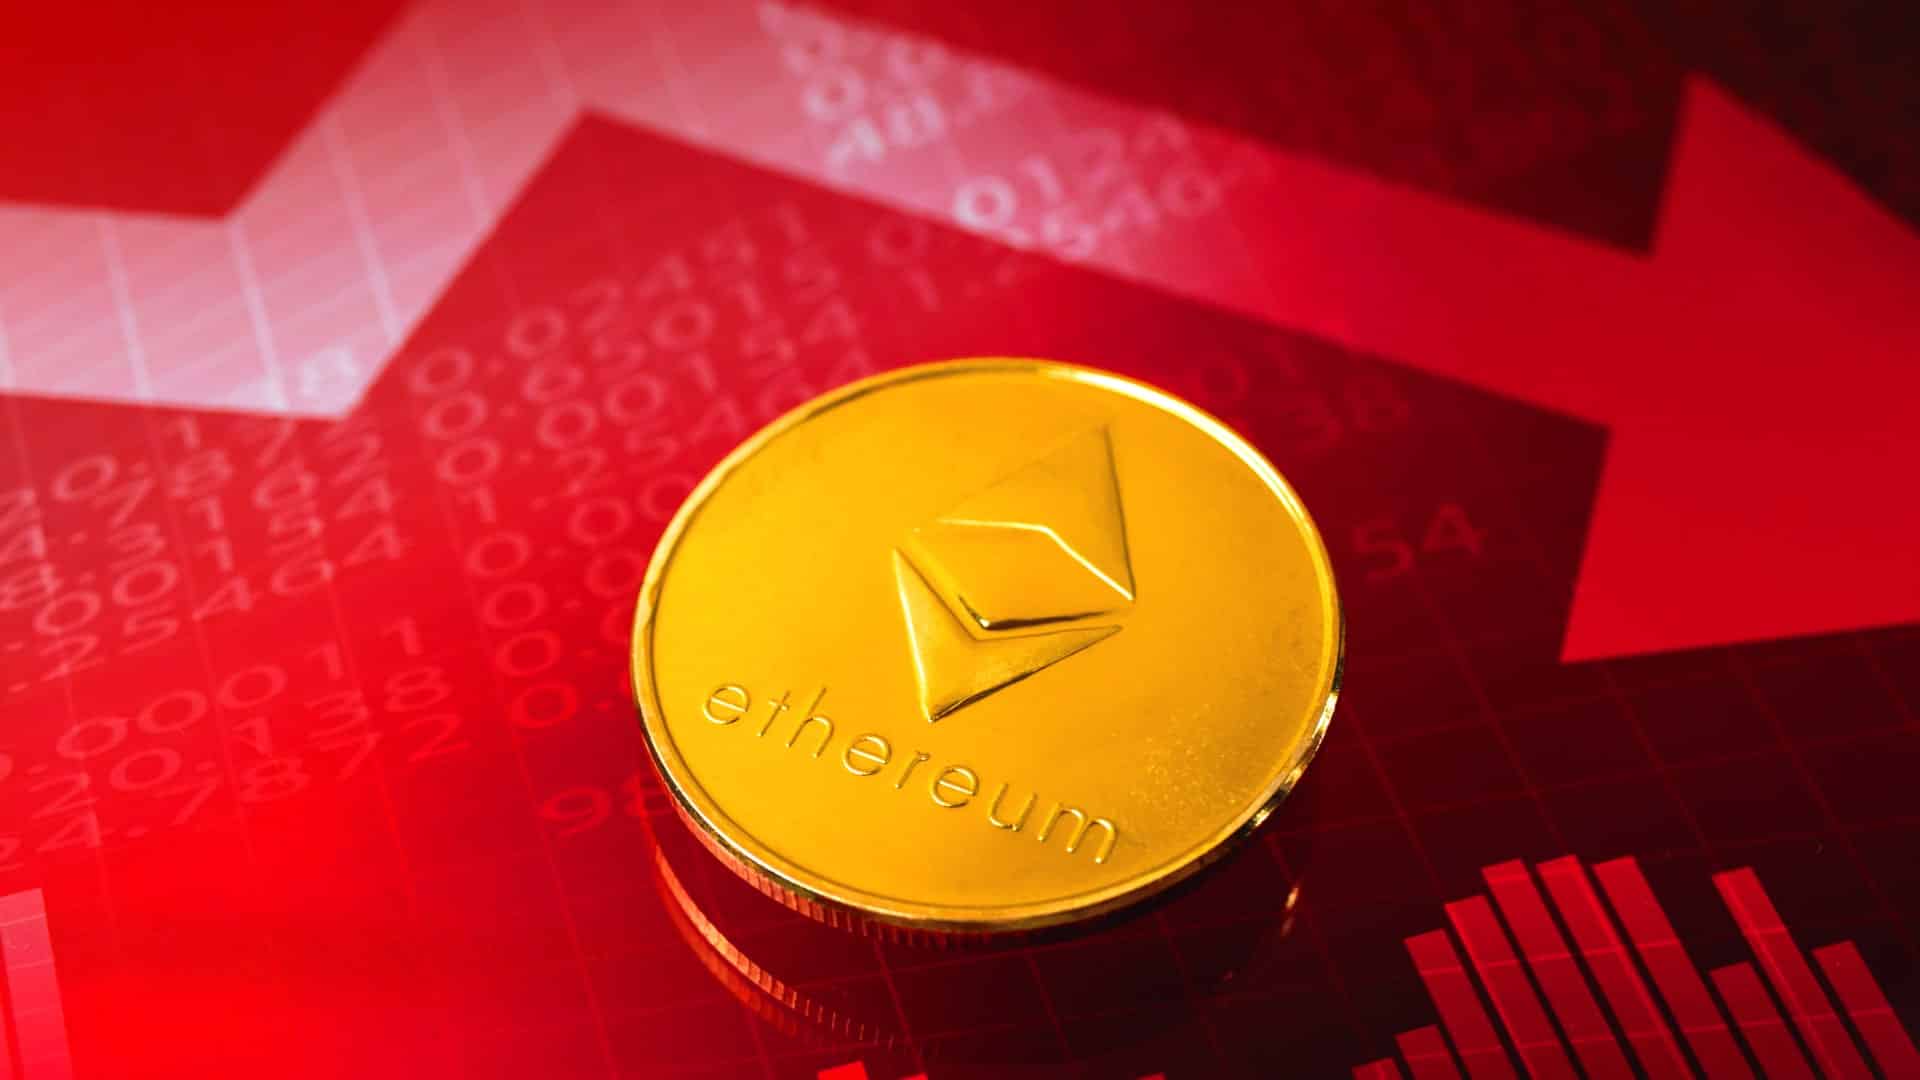 ETH Analysis – The price has dropped by 14% in one day and is testing the previous low